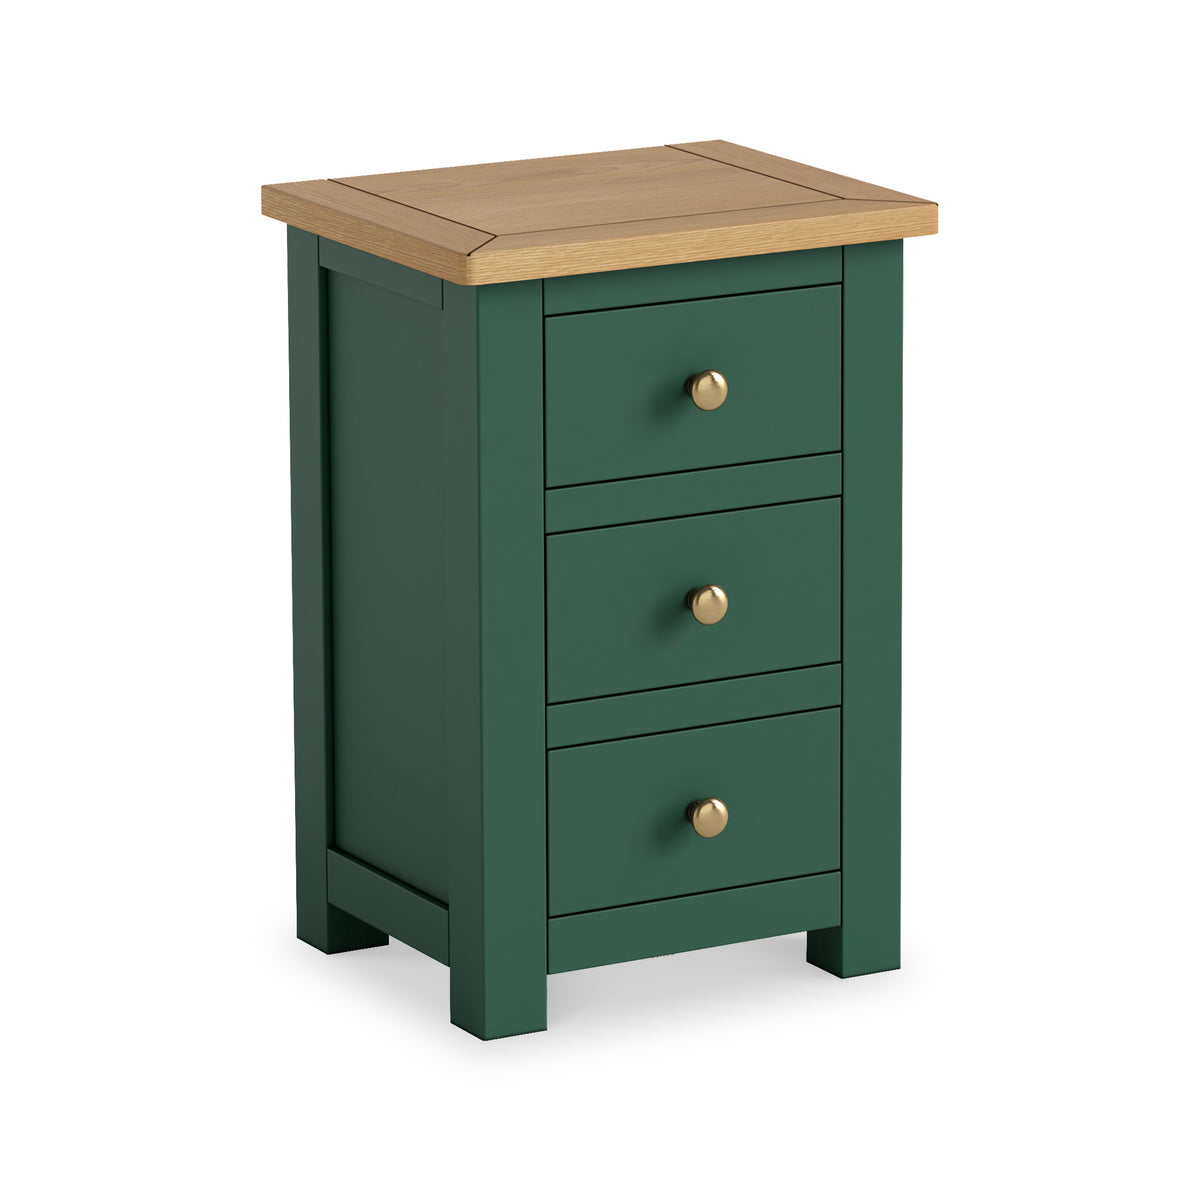 Duchy Puck Green 3 Drawer Bedside Table with Oak Top from Roseland Furniture